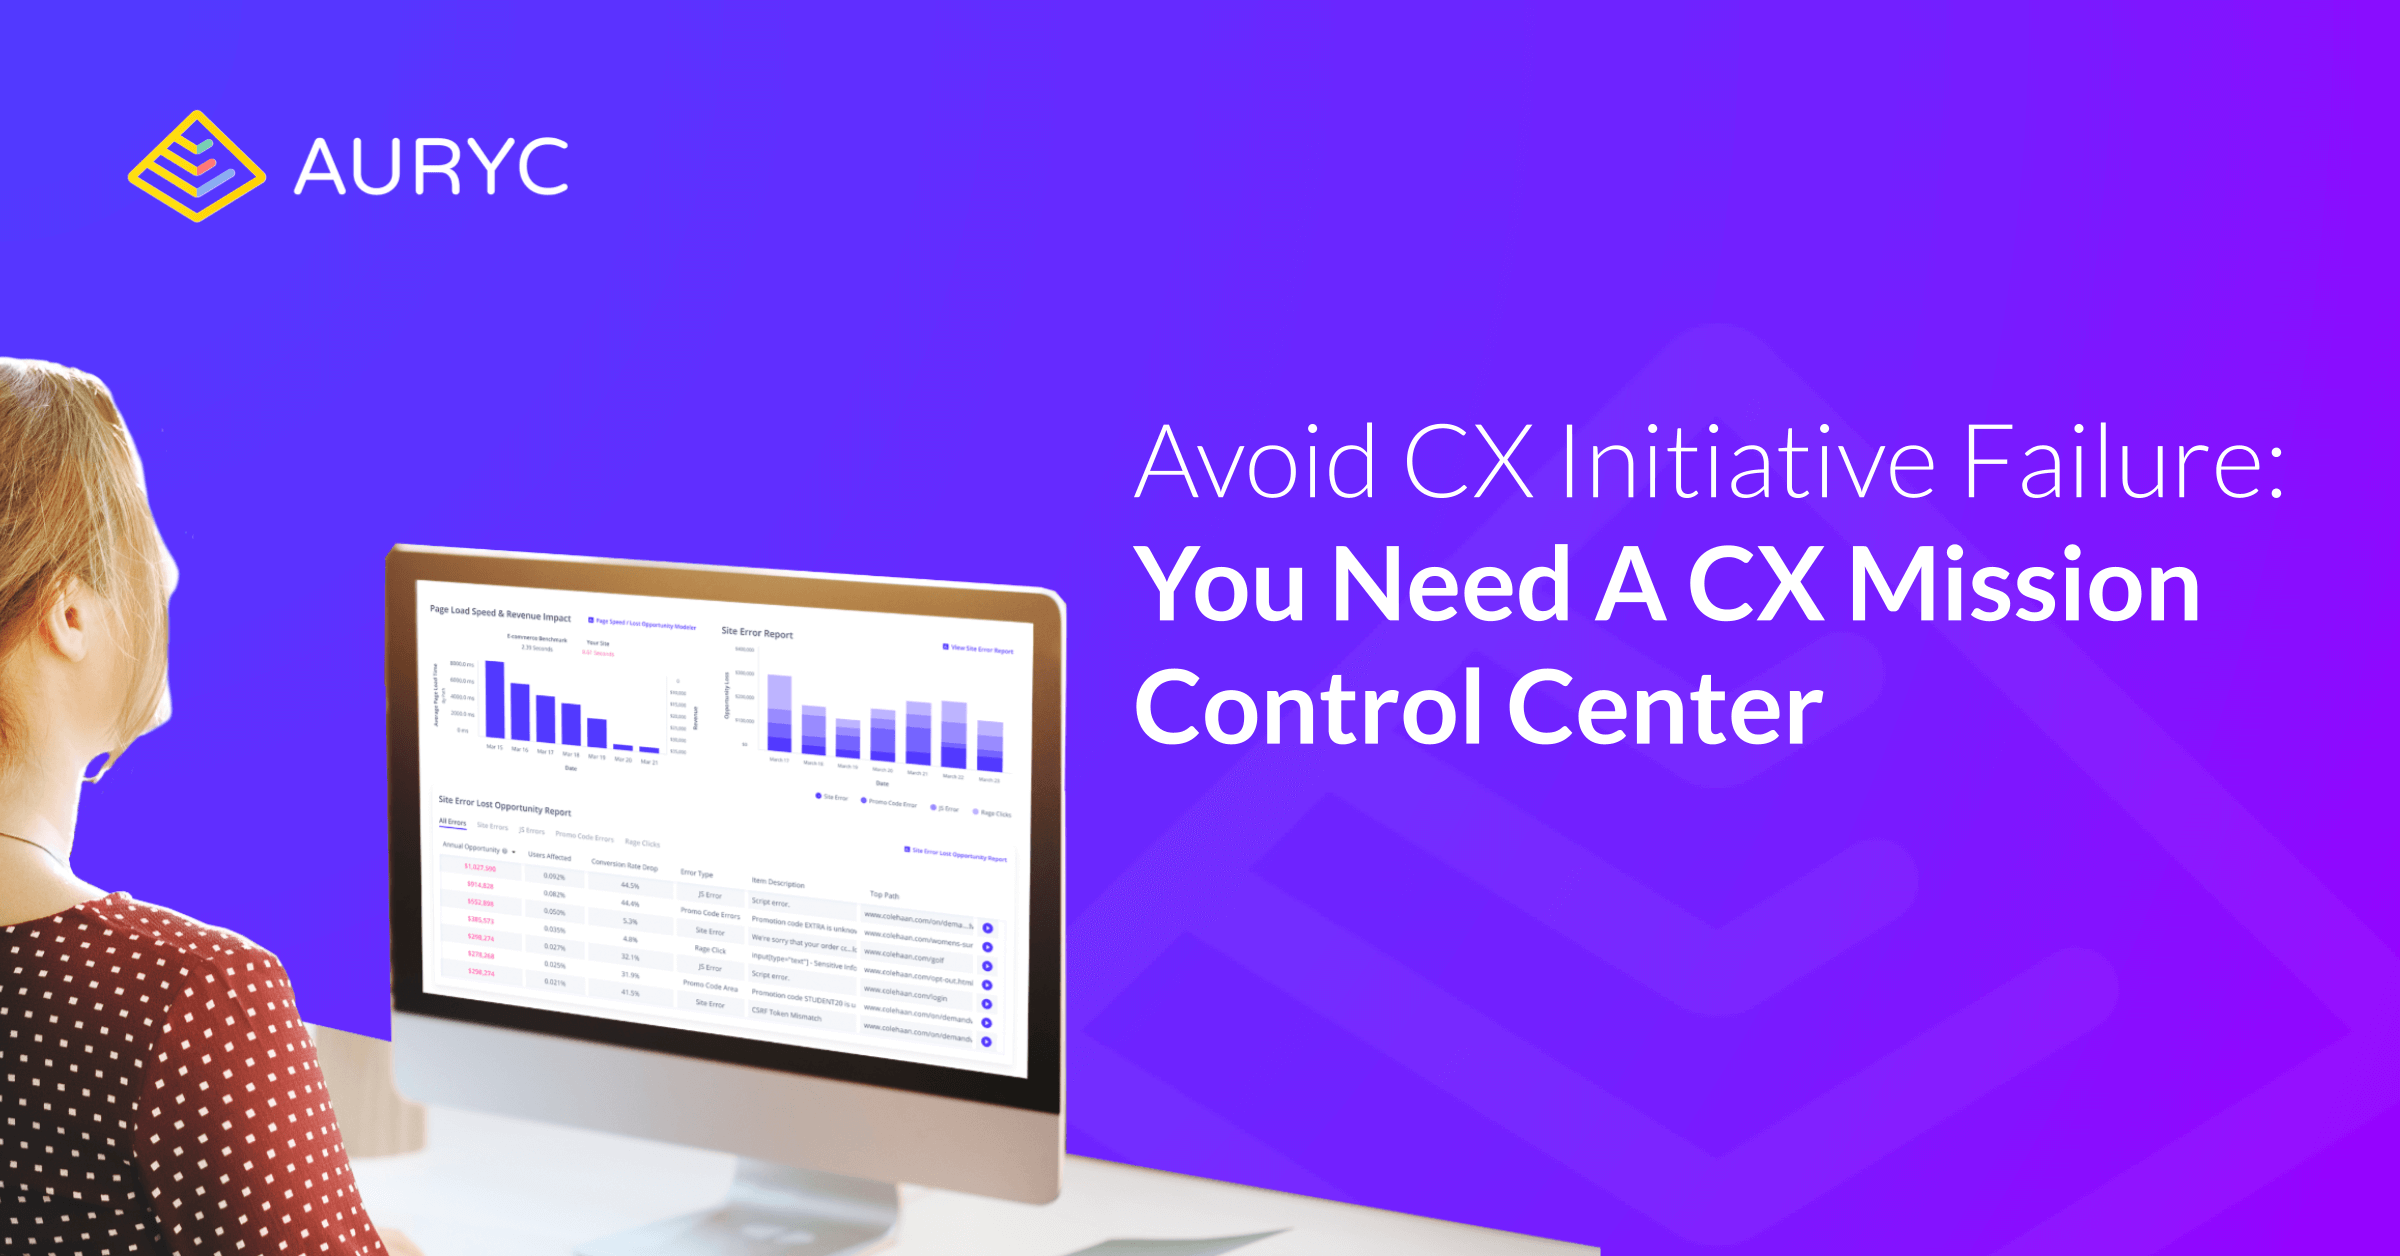 auryc-blog-featured-image-customer_experience_initiative_fail-need_cx_mission_control_center (1)